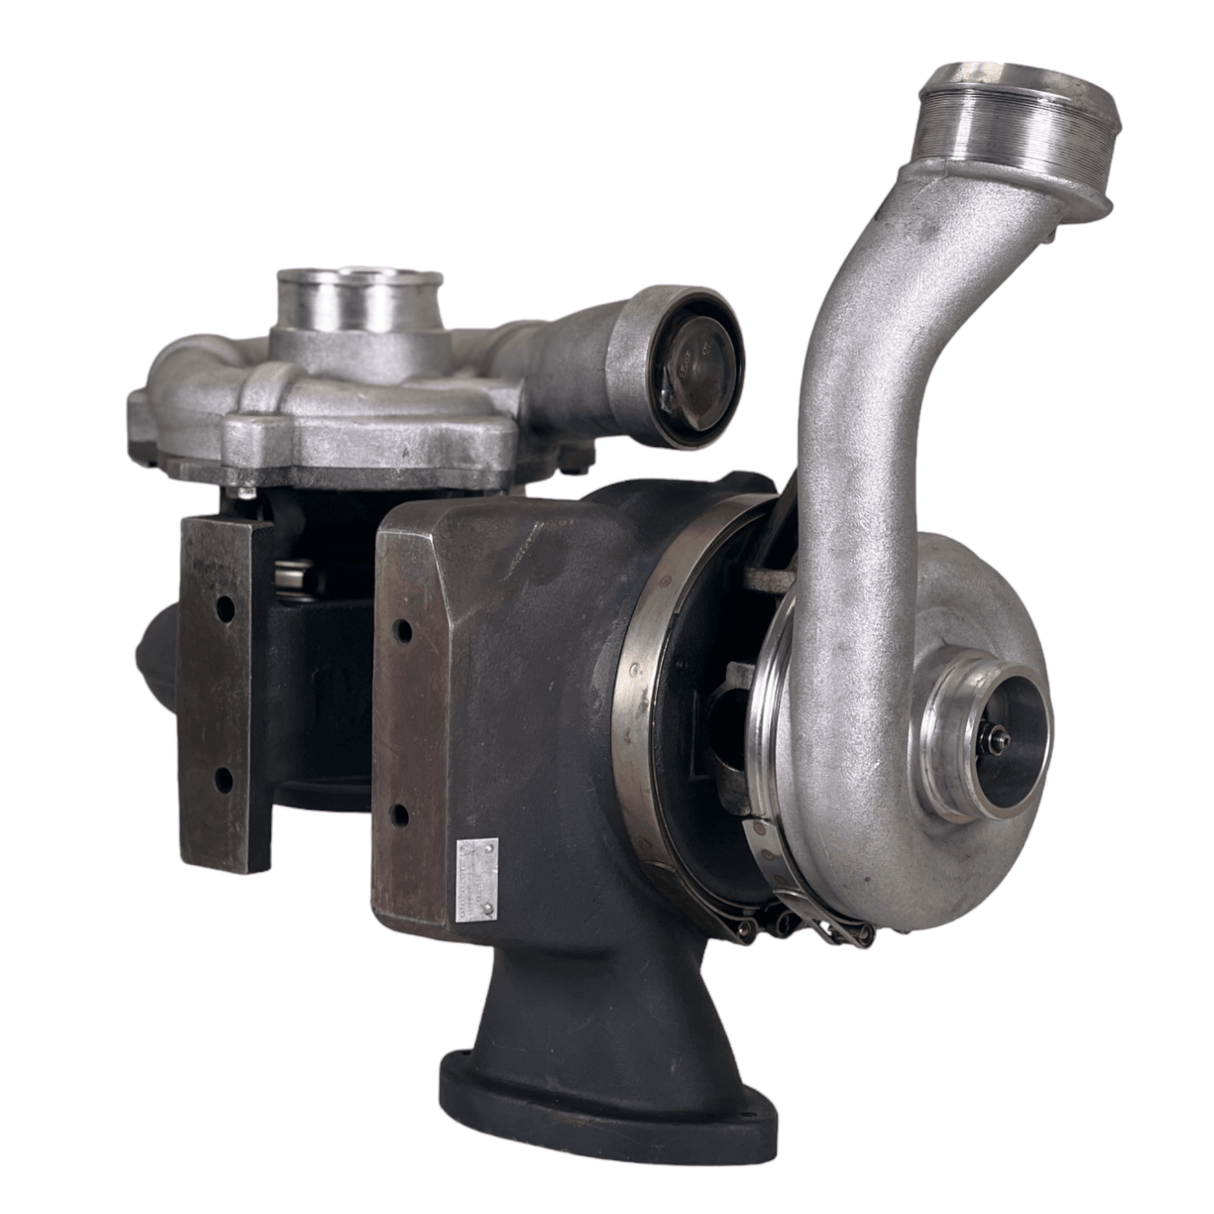 R864104T Rotomaster® Rtm Turbocharger W/ Actuator High / Low Pressure For Ford.